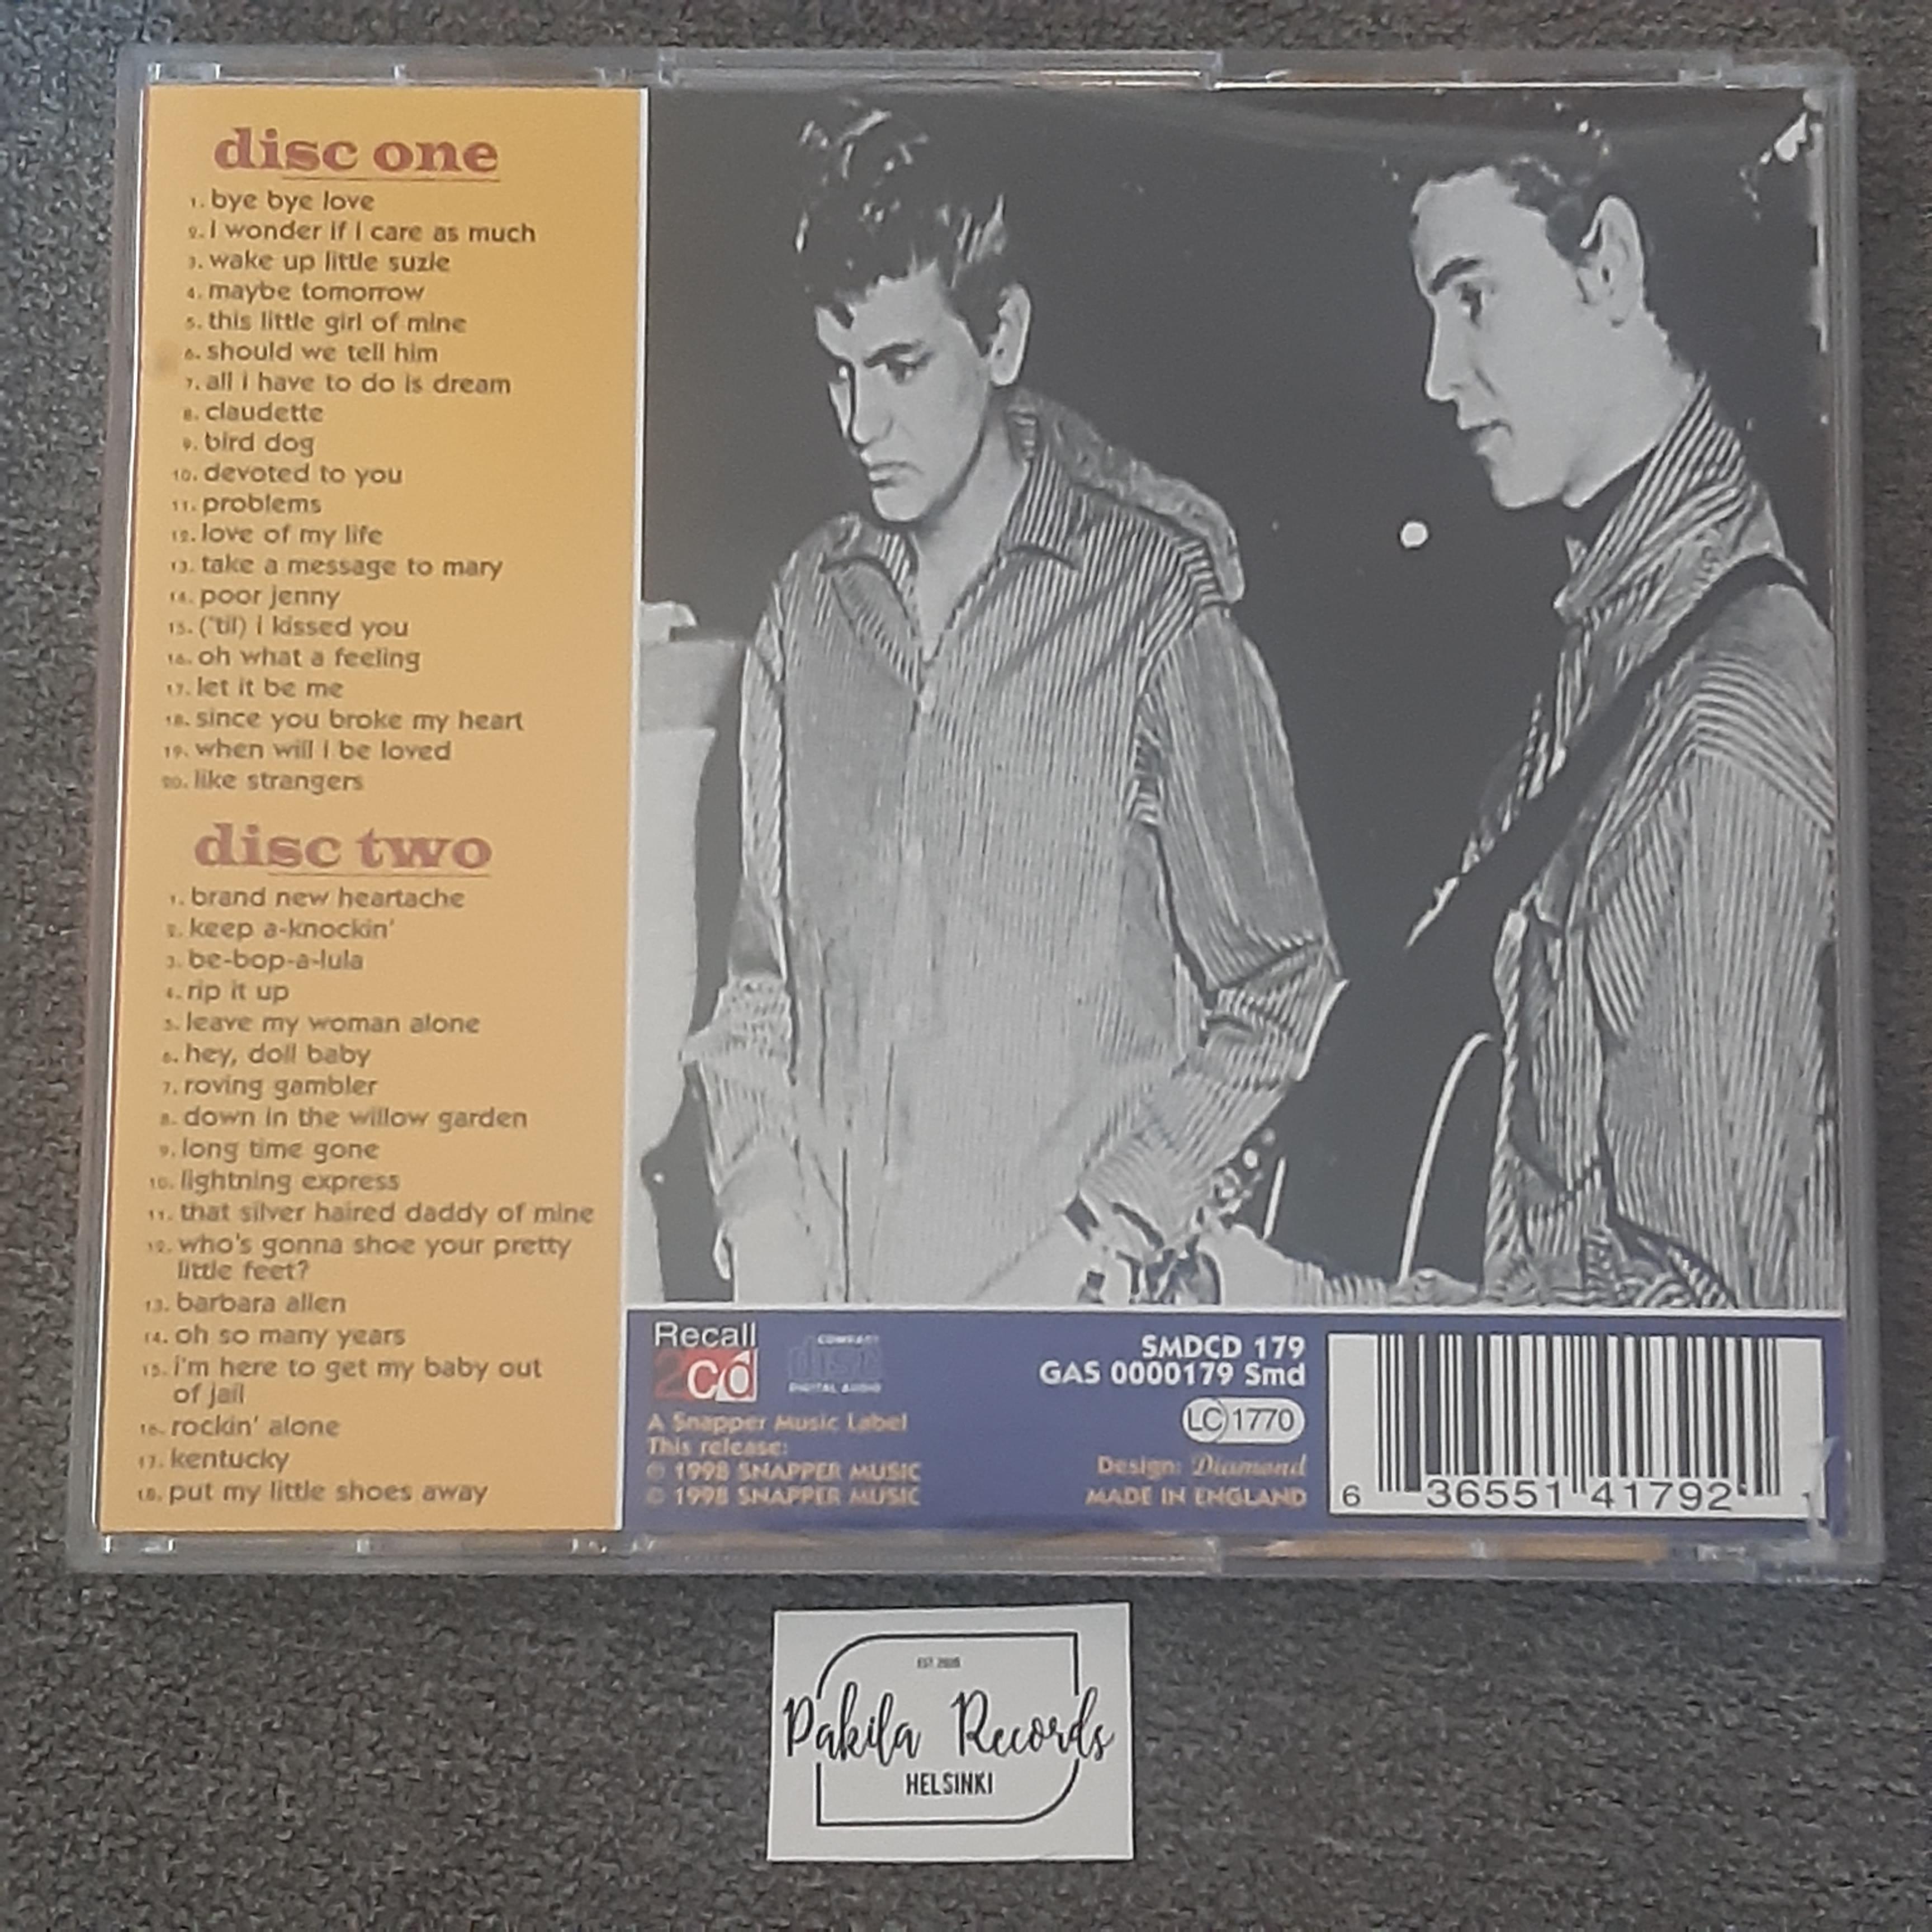 The Everly Brothers - Brothers In Rhythm - 2 CD (käytetty)